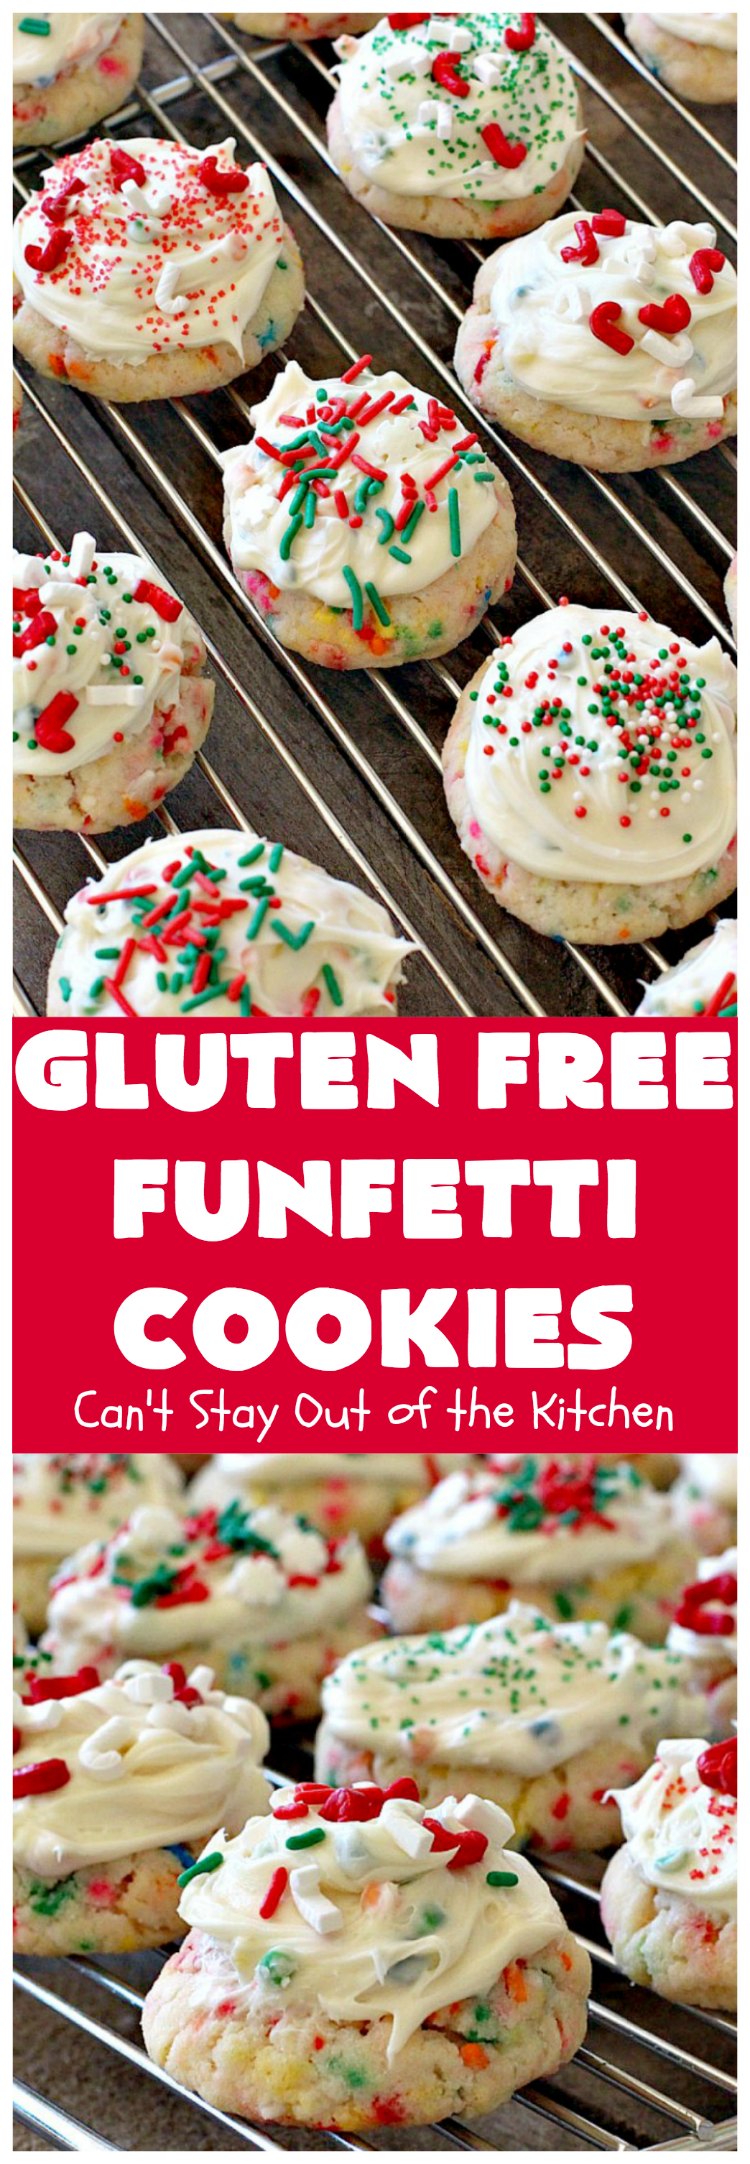 Gluten Free Funfetti Cookies | Can't Stay Out of the Kitchen